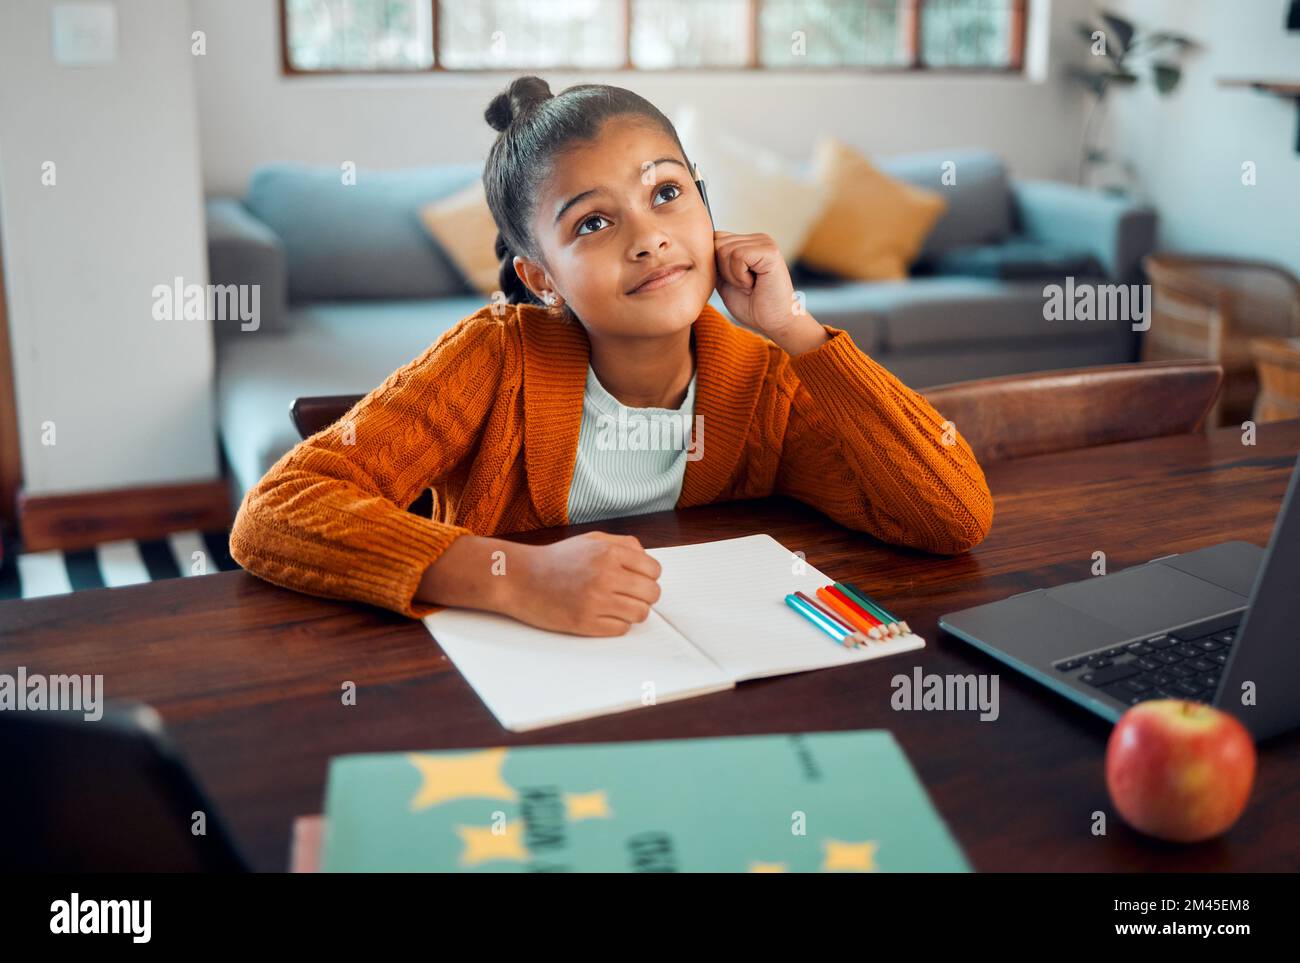 Education, writing or girl in a house thinking of solutions, learning math problem solving or child development. Ideas, child or young Indian school Stock Photo